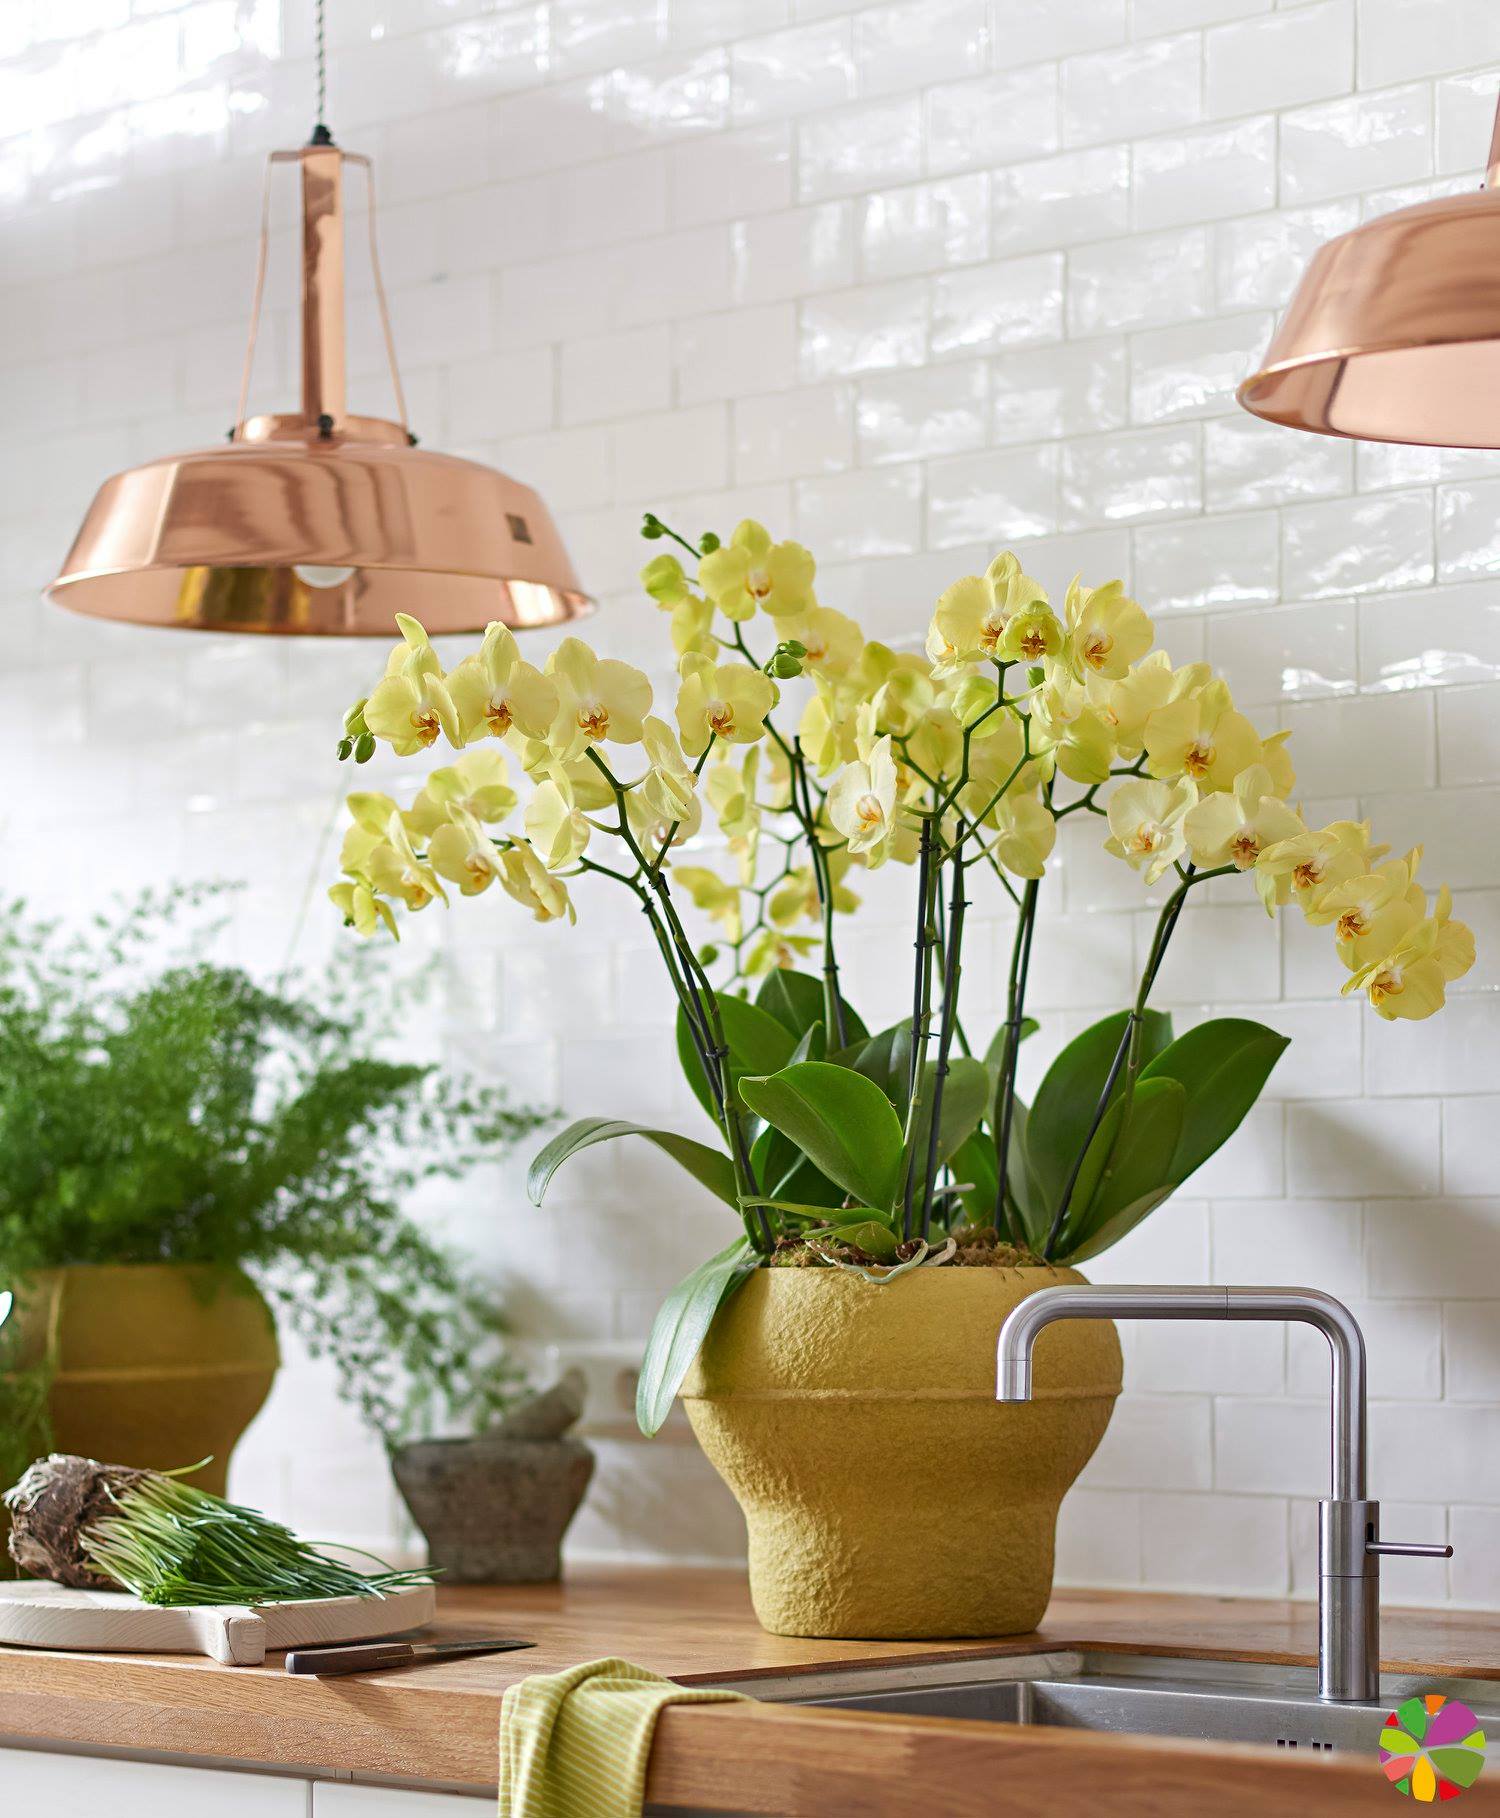 Add colour to your kitchen with the help of orchids